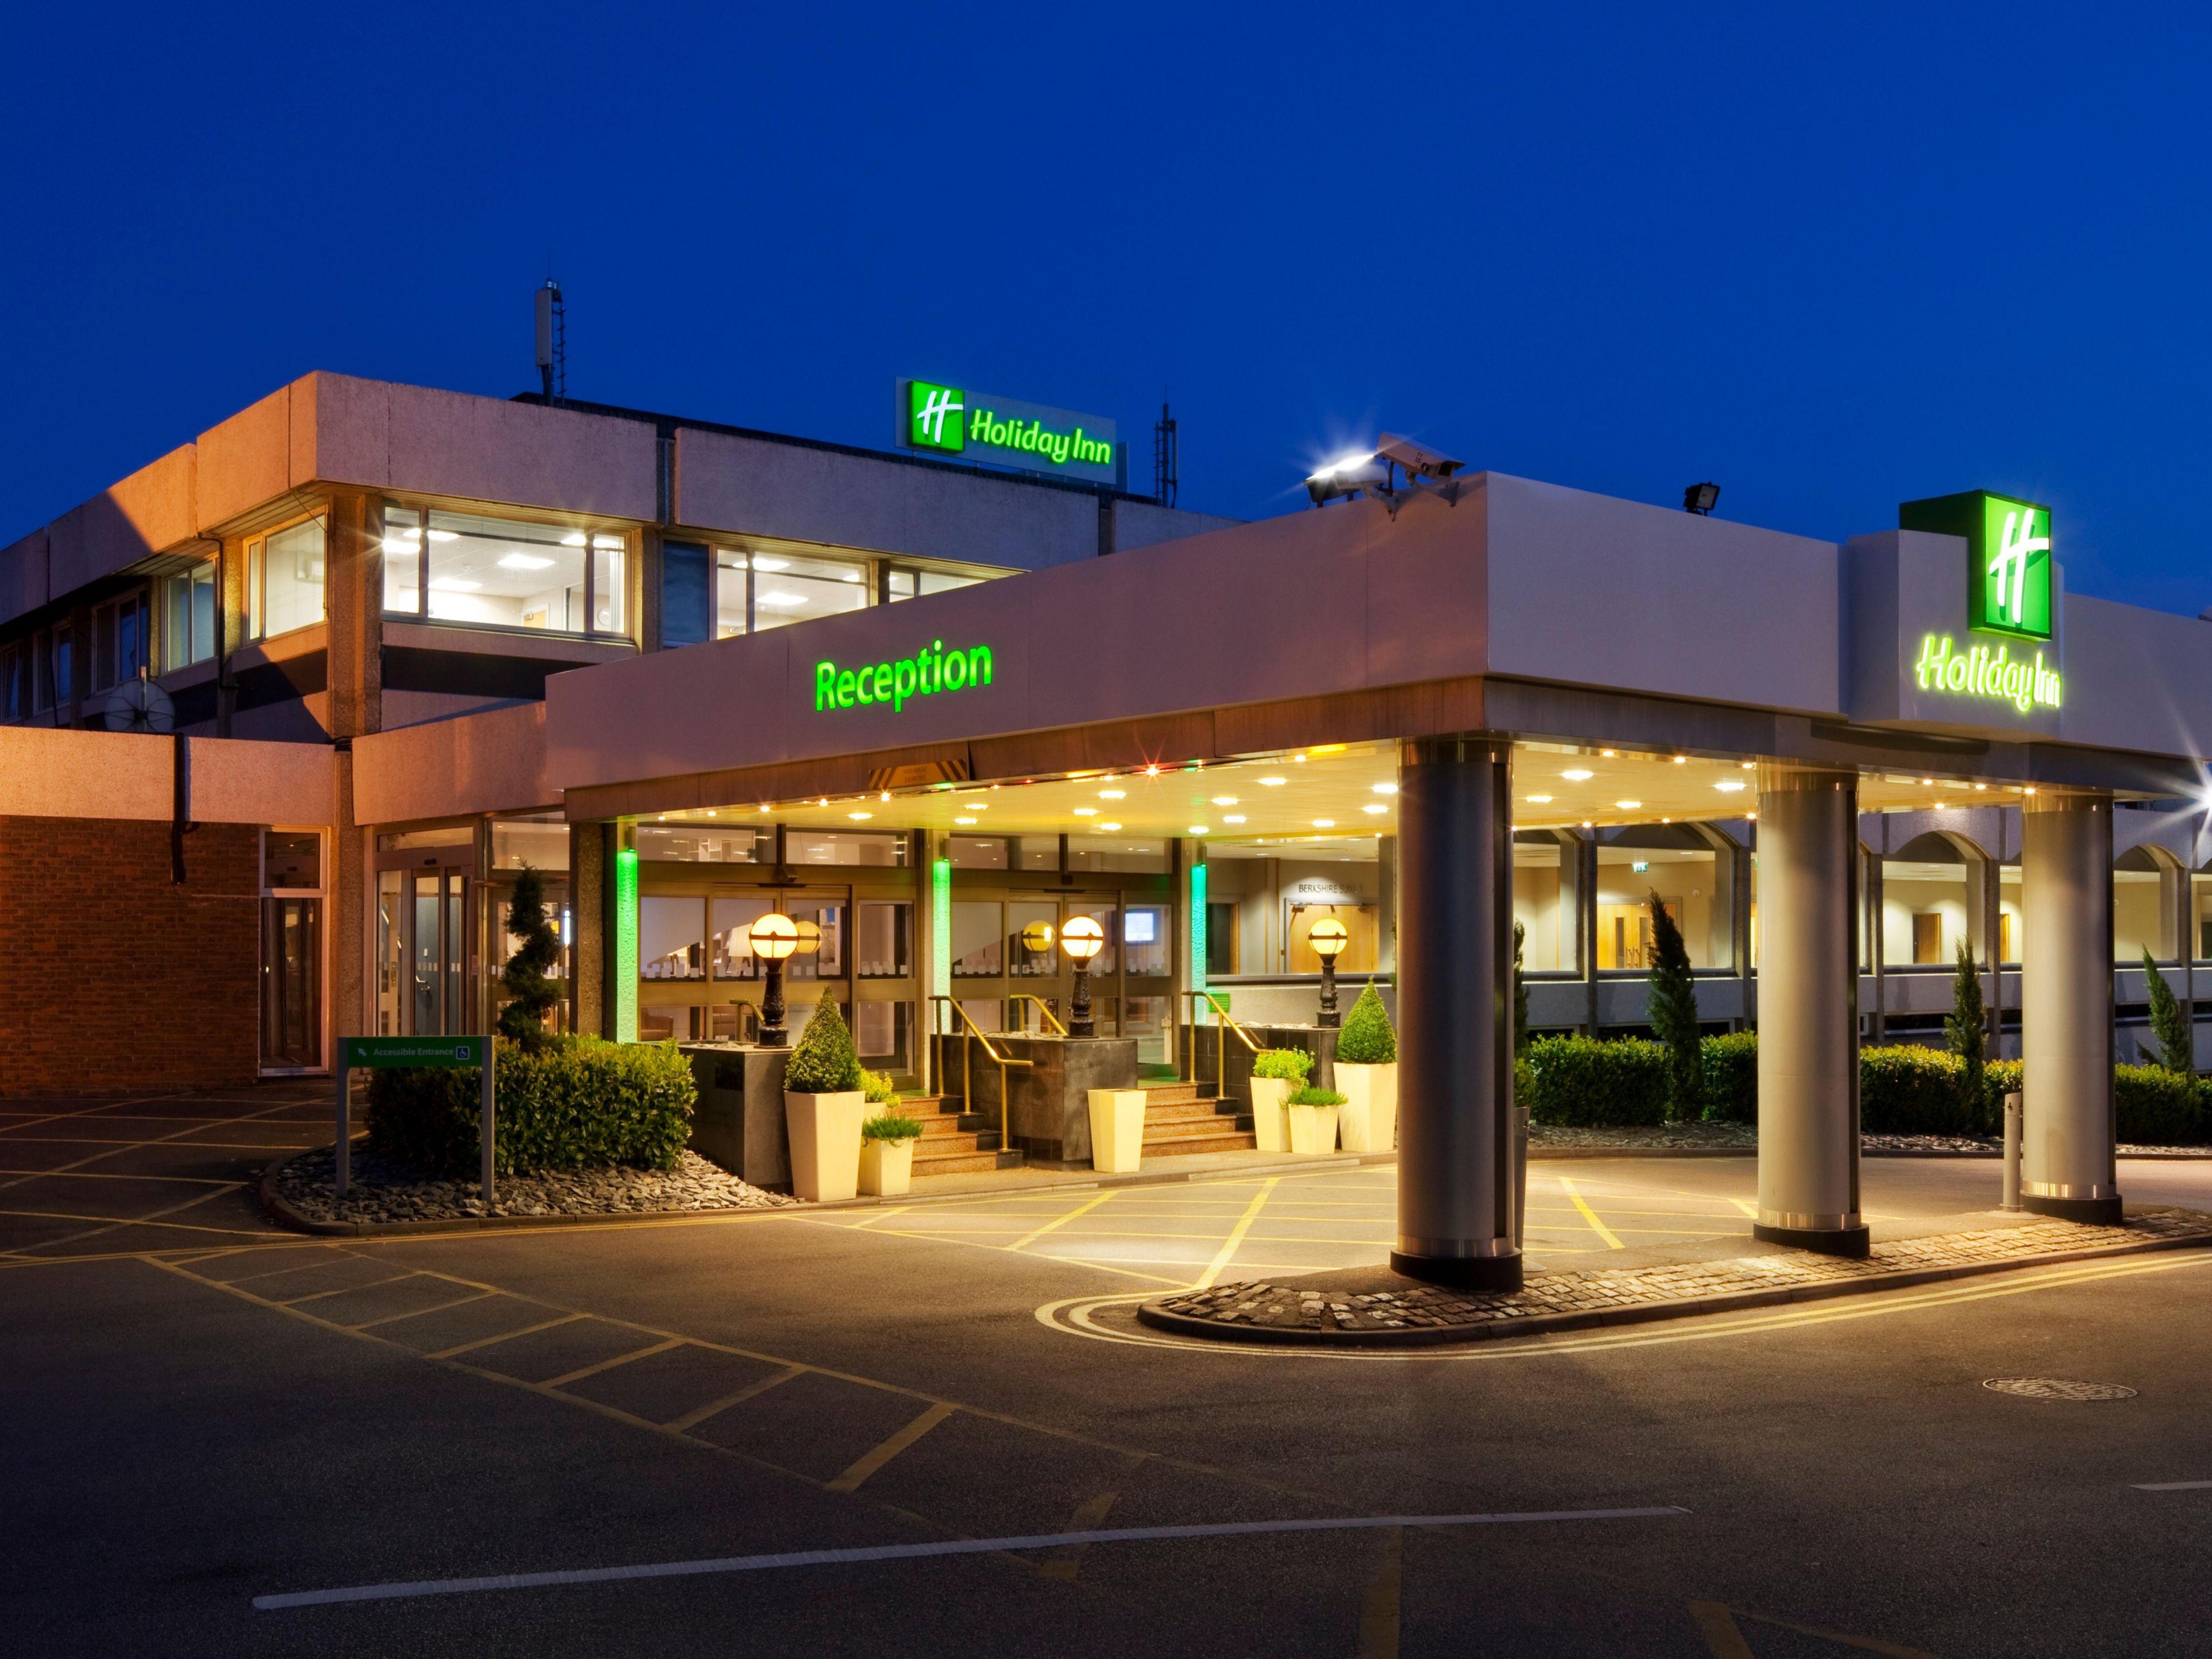 Close to the M4 and only 20 minutes drive from Heathrow Airport, and with a direct train into London Paddington from Maidenhead station just a mile and a half away, this hotel really is easy to reach. Windsor is just six miles away, and complimentary parking is also available for hotel guests.